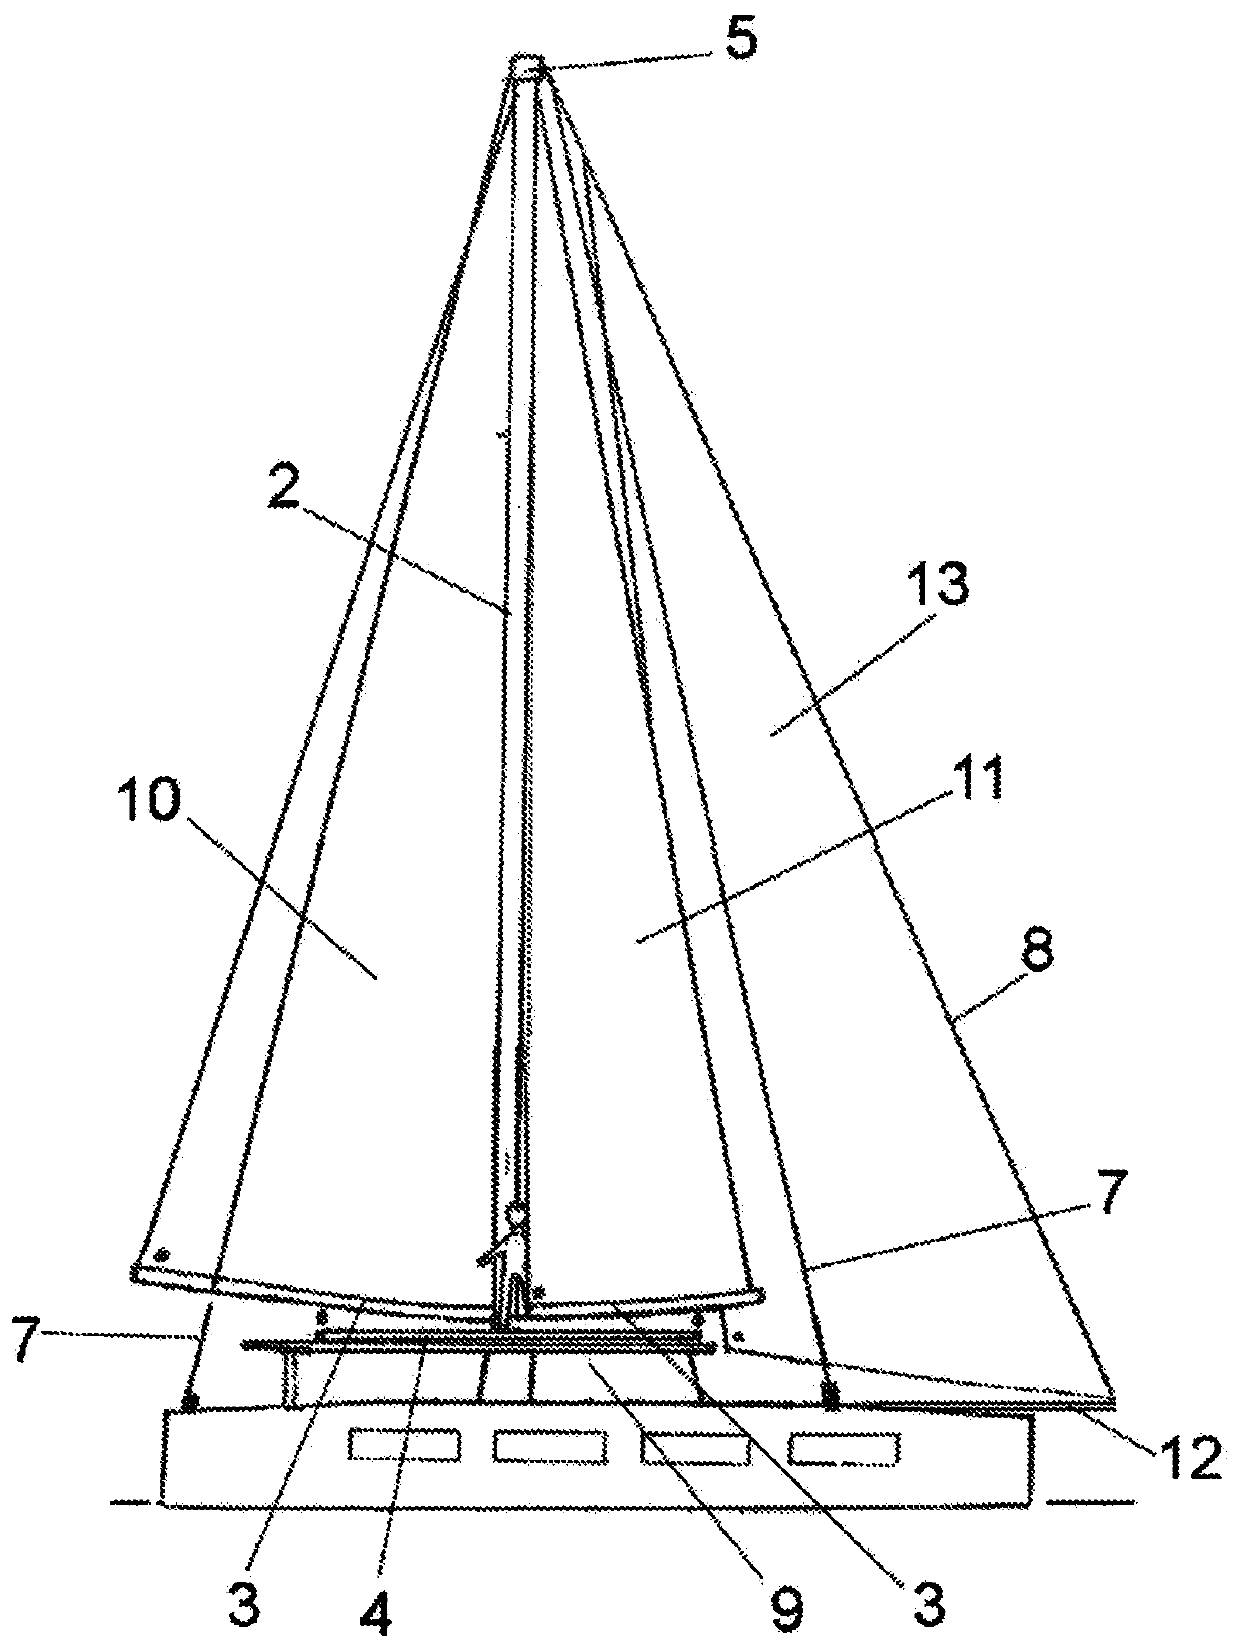 Stabilised rotary sail rigging